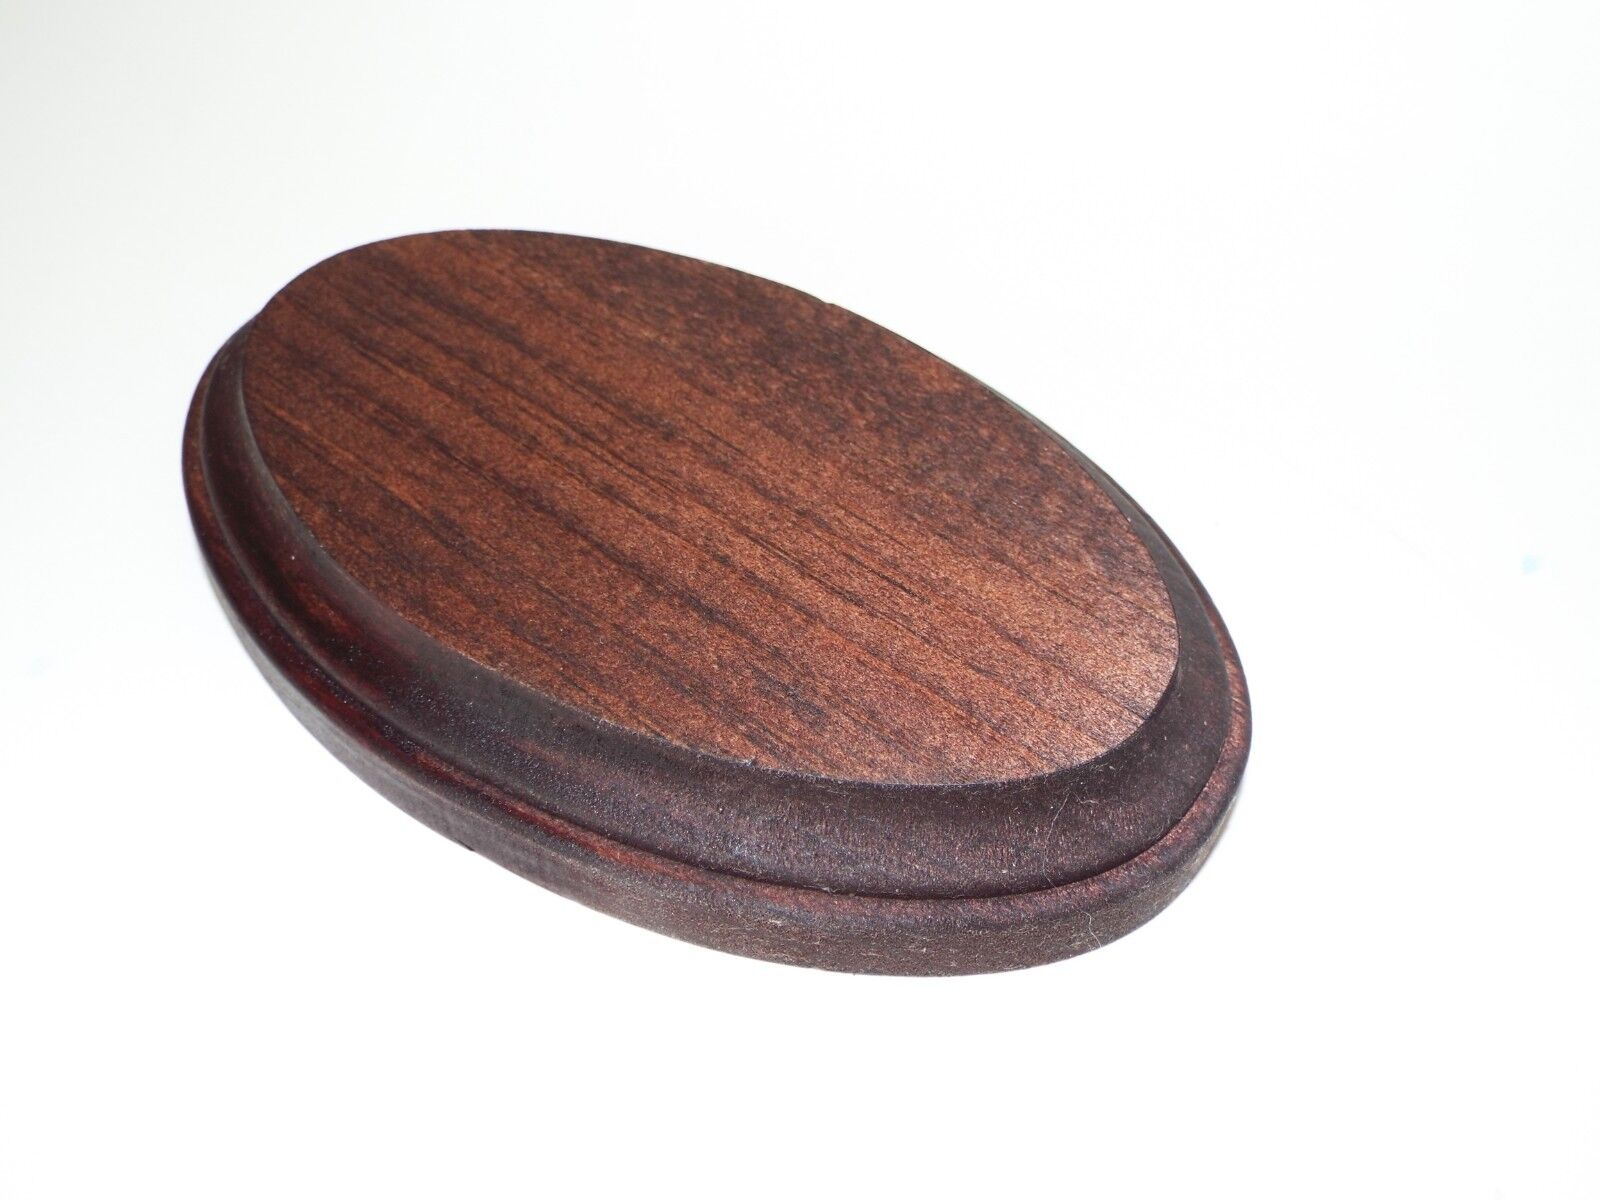 Very Large Mahogany Finish Oval Display Plaque. Display Base. Display Stand.